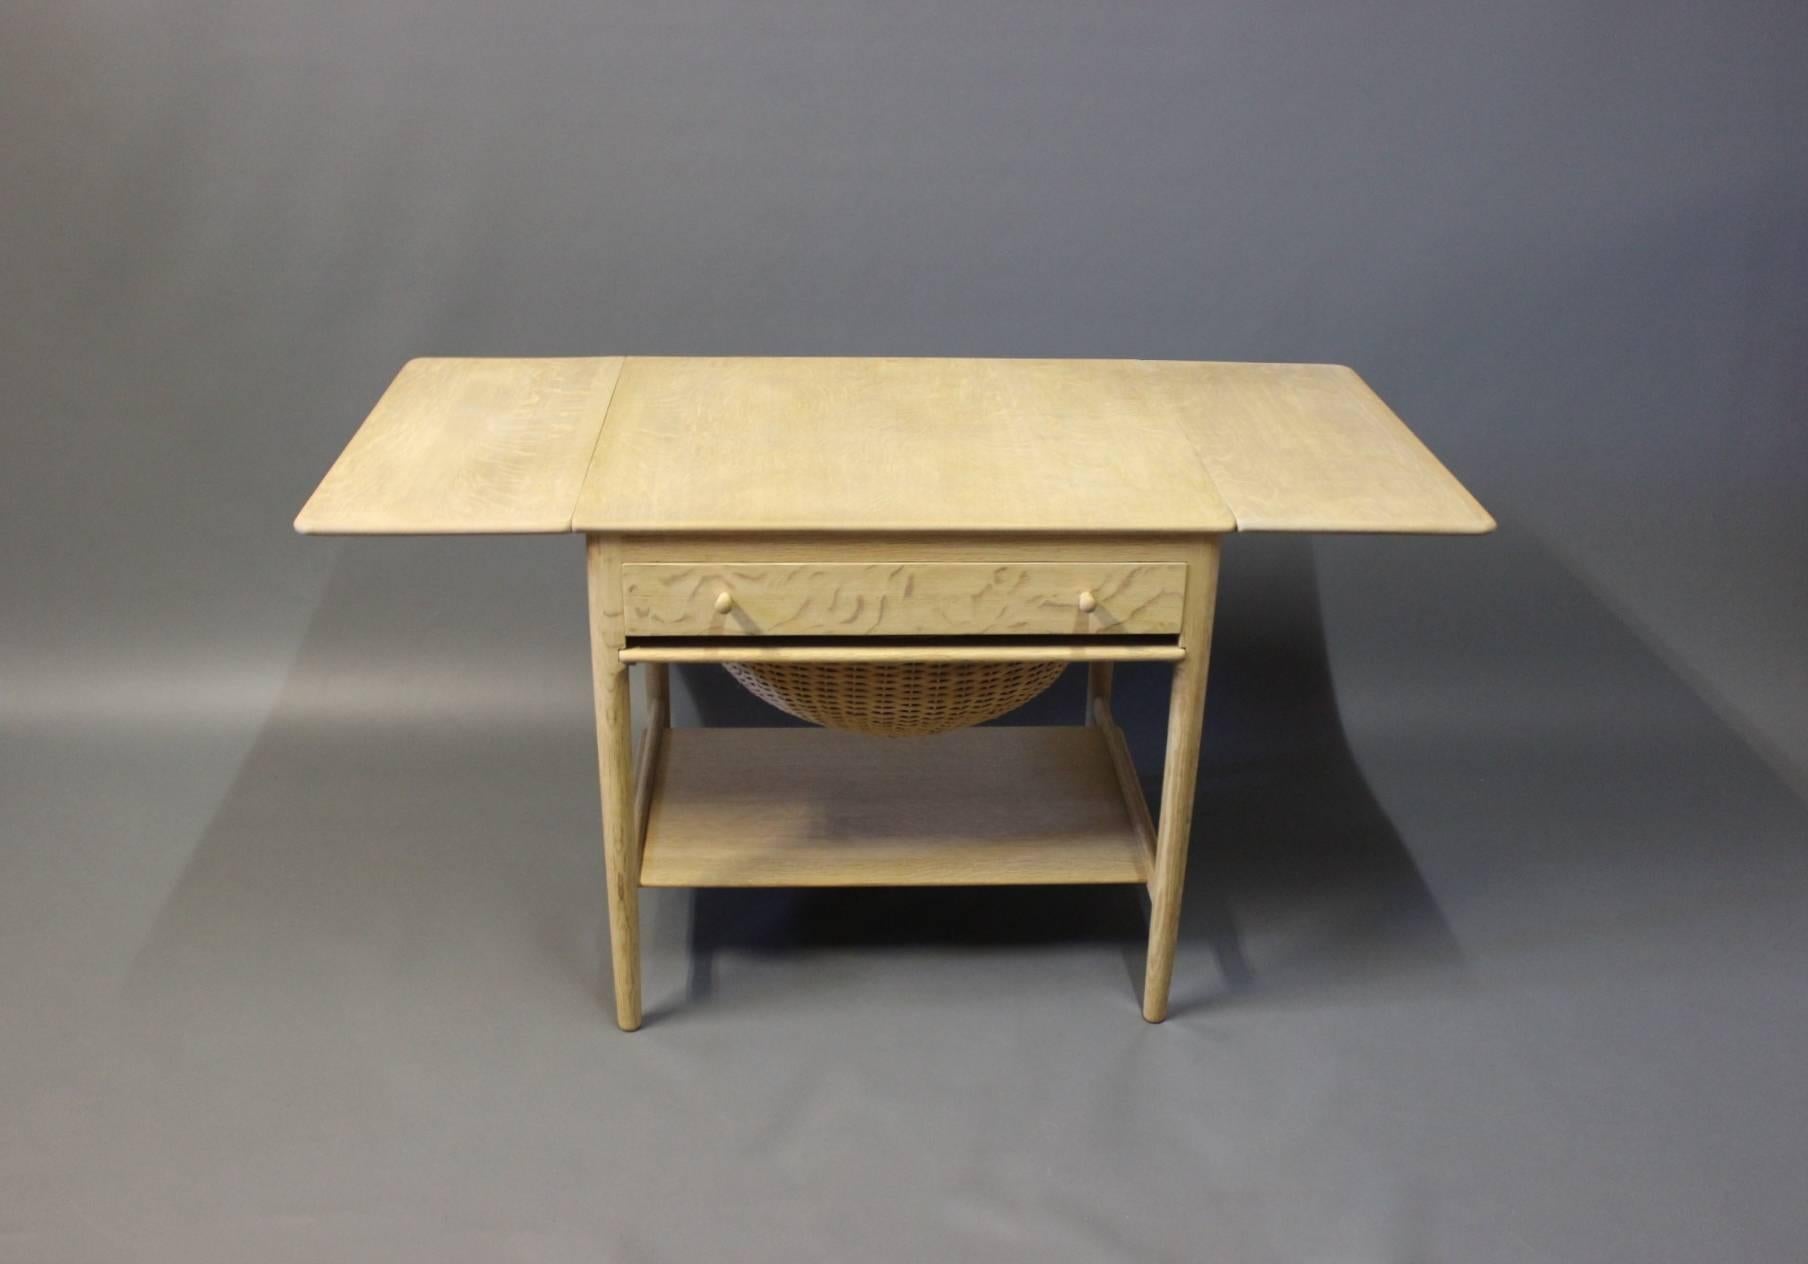 Sewing table in soap treated oak, model AT-33, designed by Hans J. Wegner in 1950 and manufactured by Andreas Tuck in the 1960s.